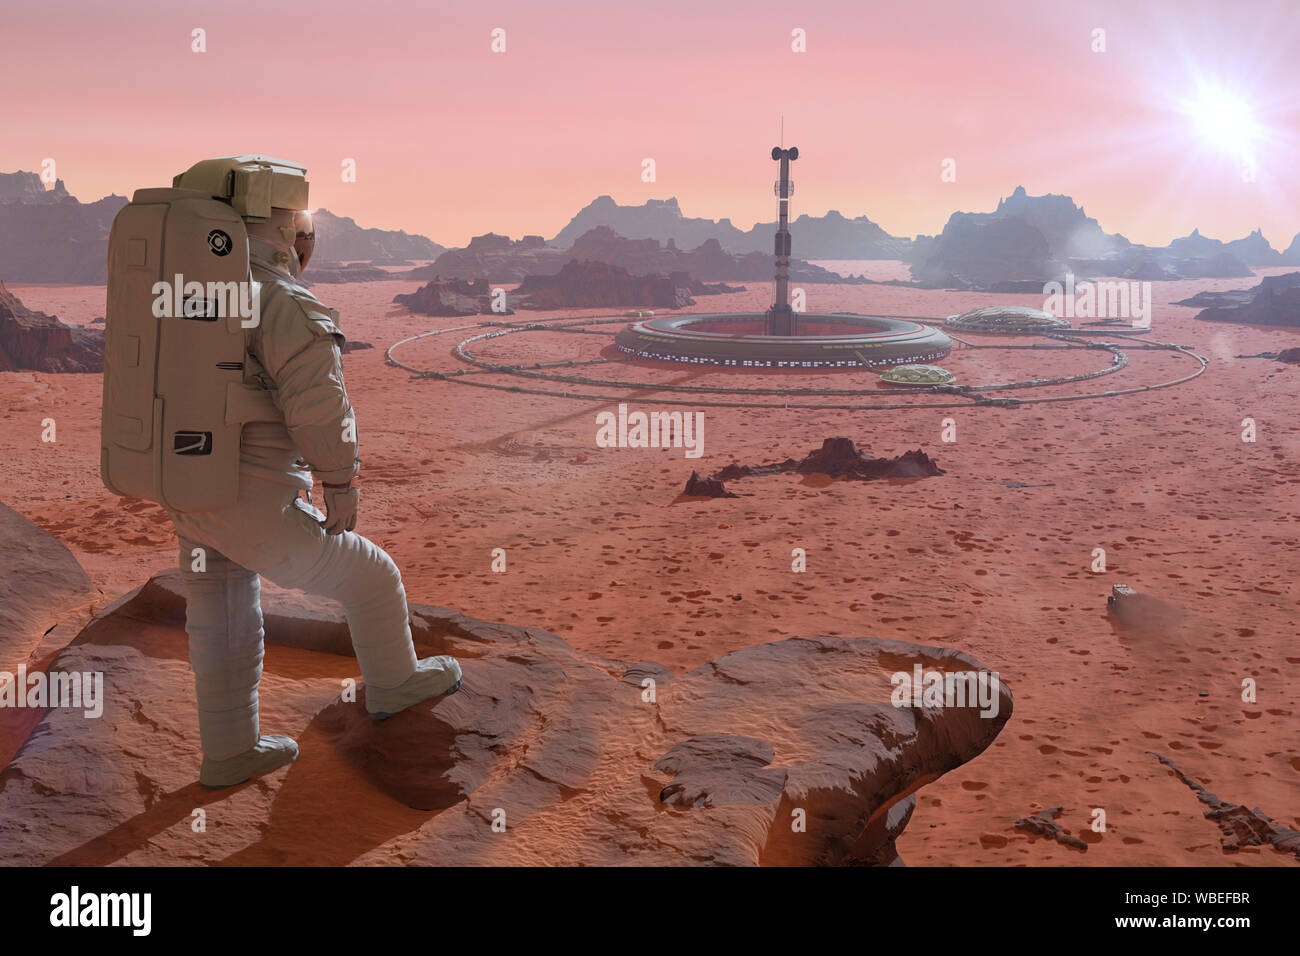 astronaut on planet Mars, looking at a base in the desert landscape Stock  Photo - Alamy